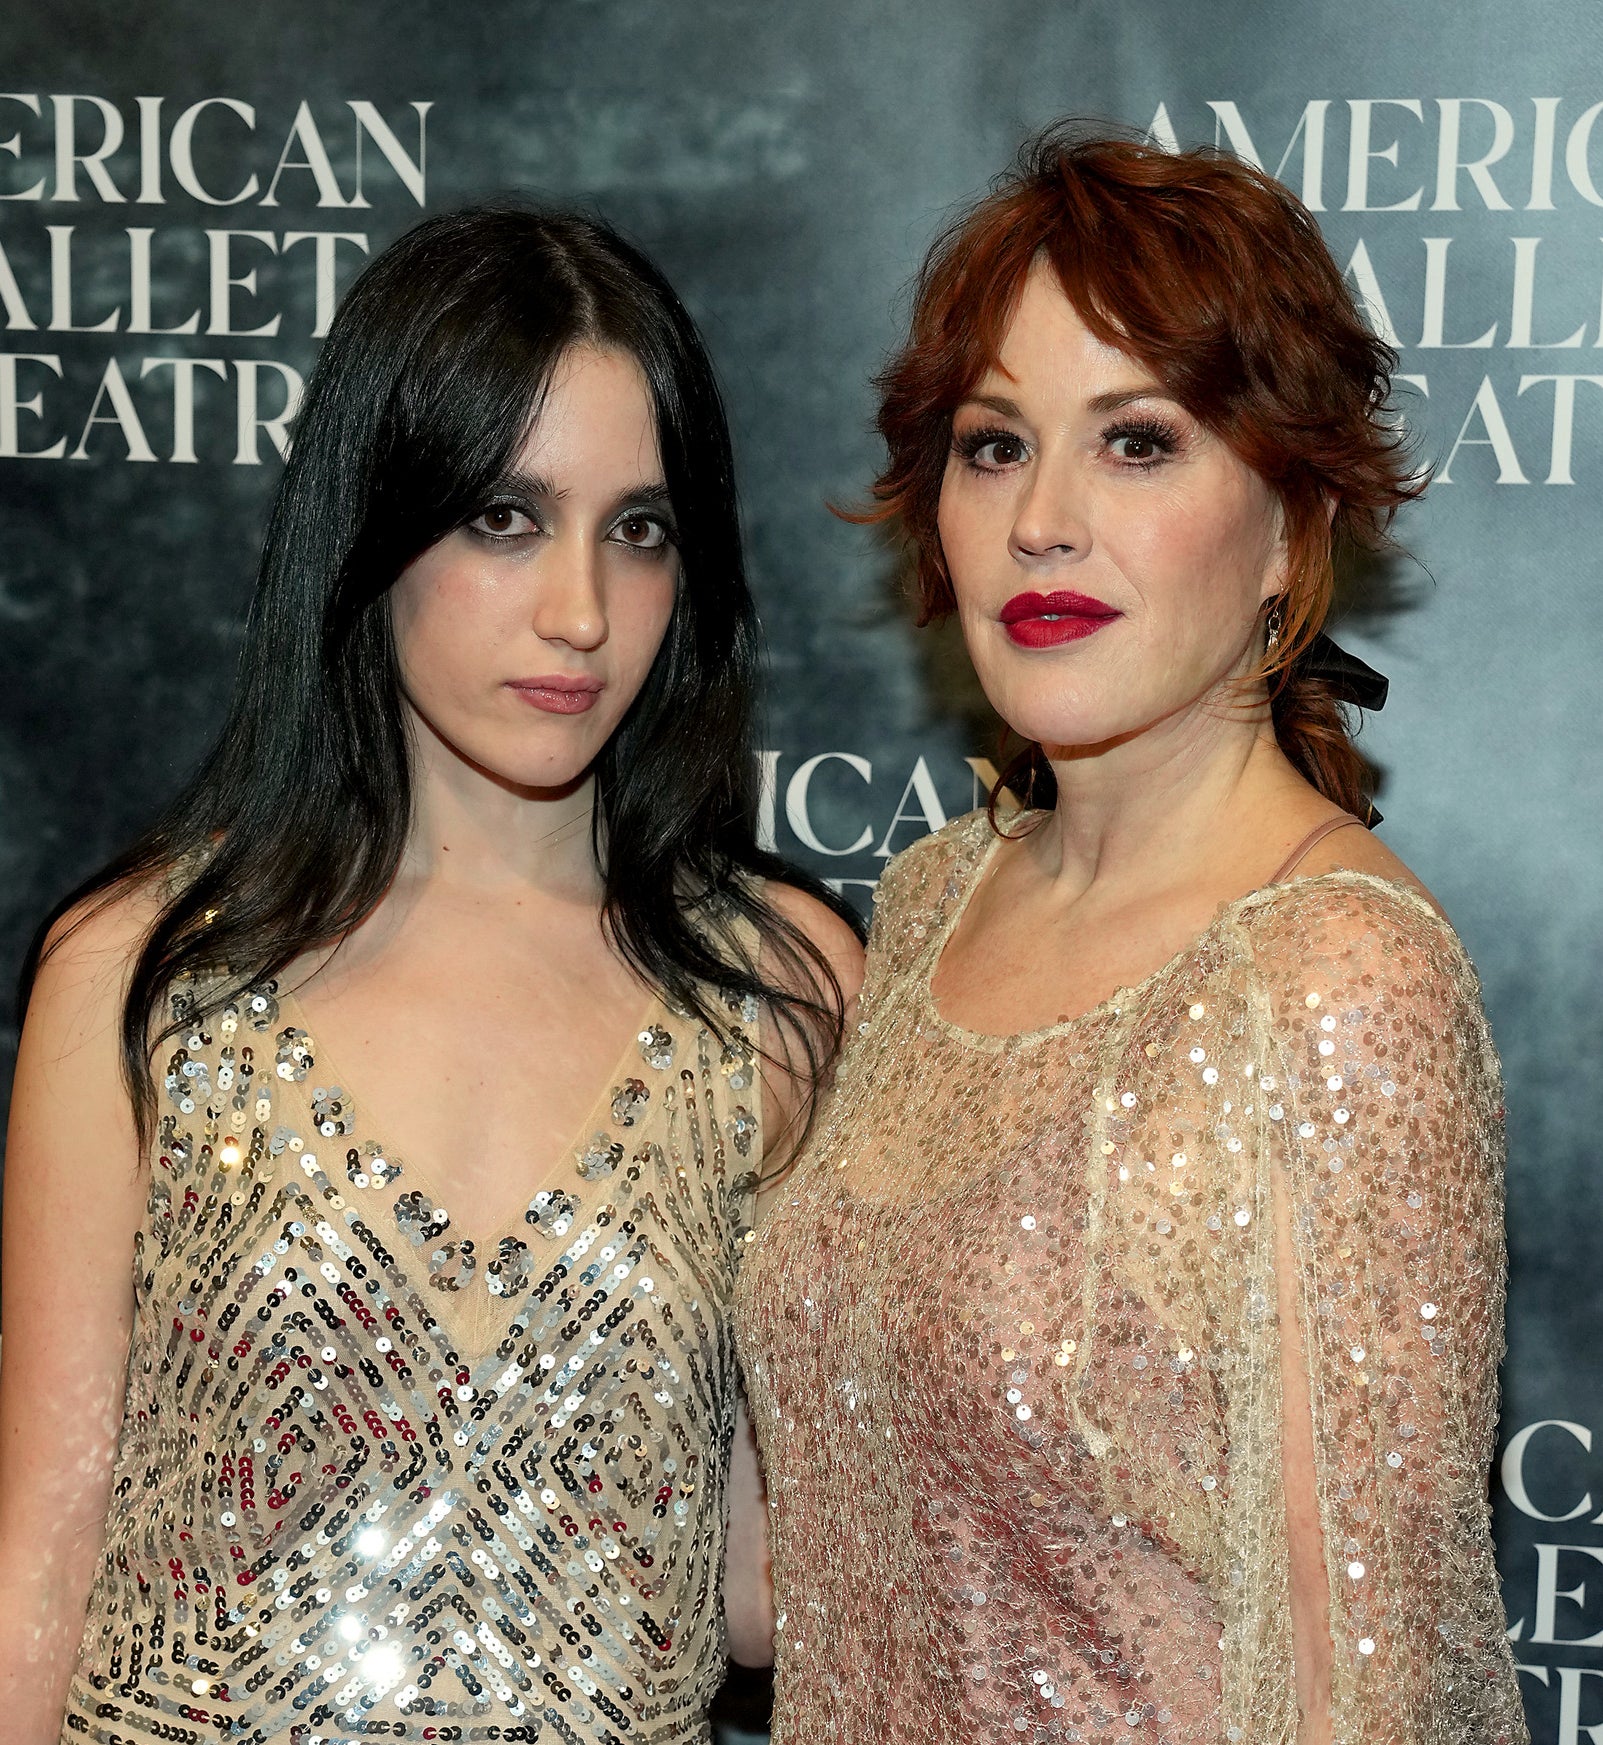 Molly Ringwald with her daughter Mathilda in 2023